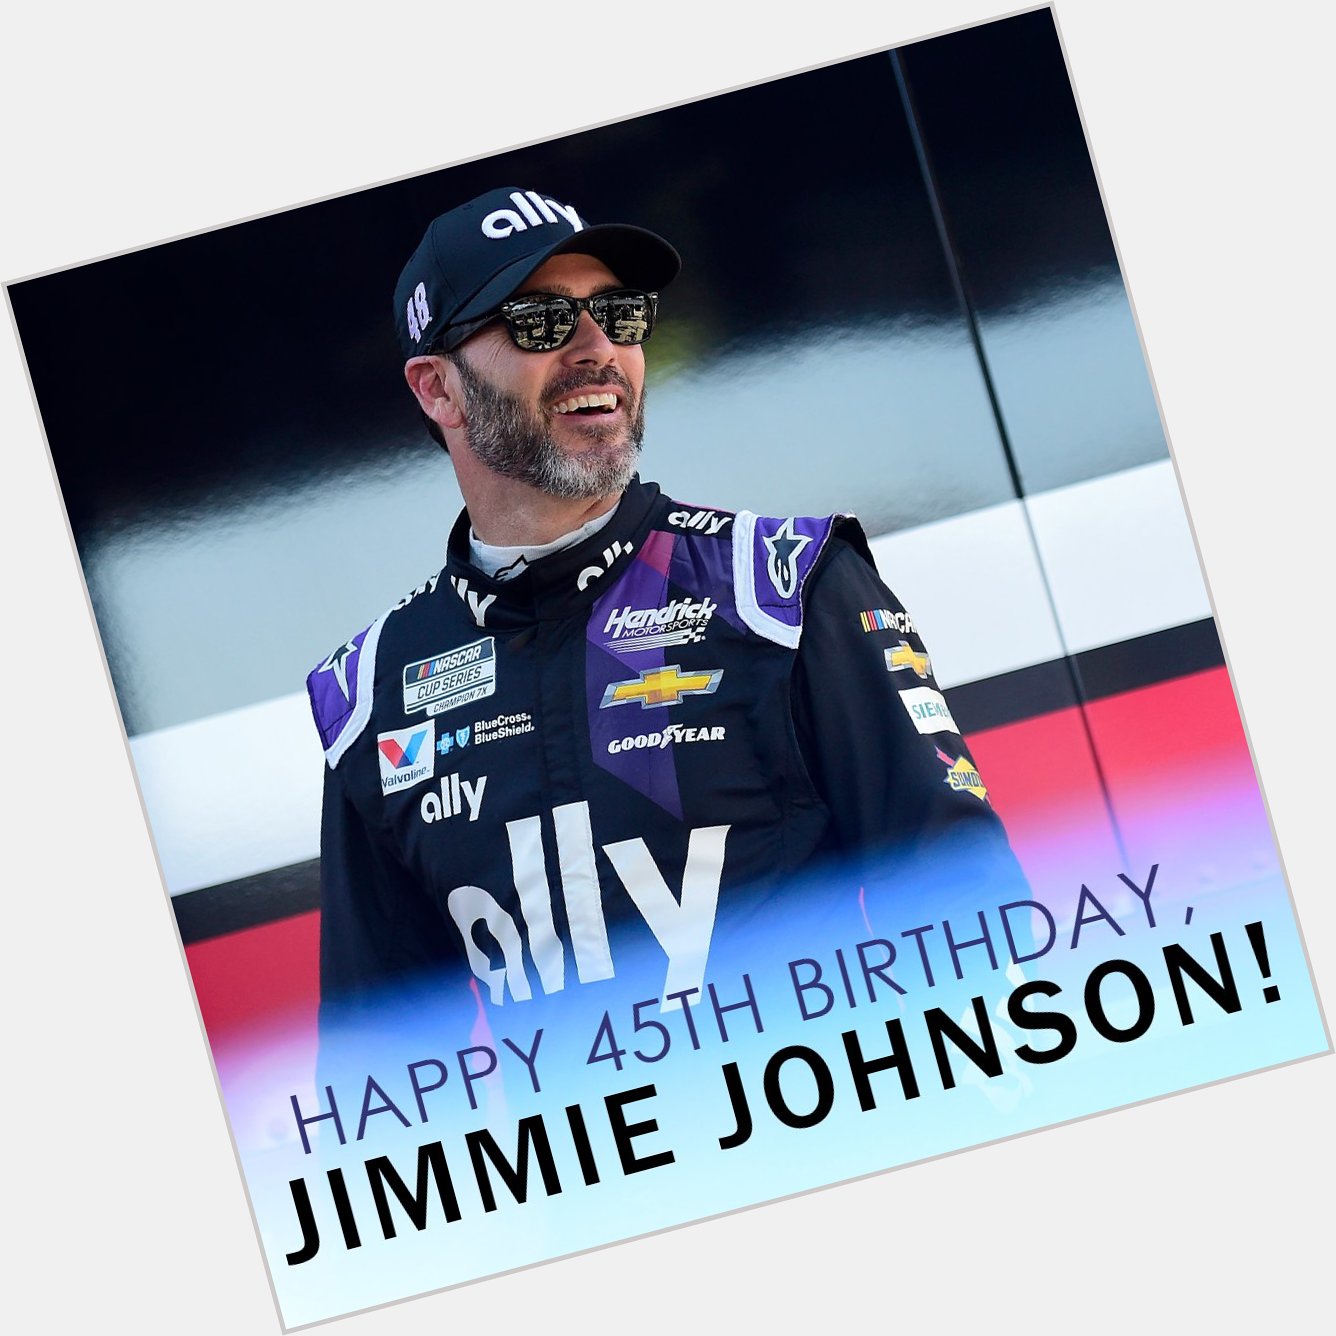 Happy 45th Birthday to seven-time NASCAR champion, Jimmie Johnson! 